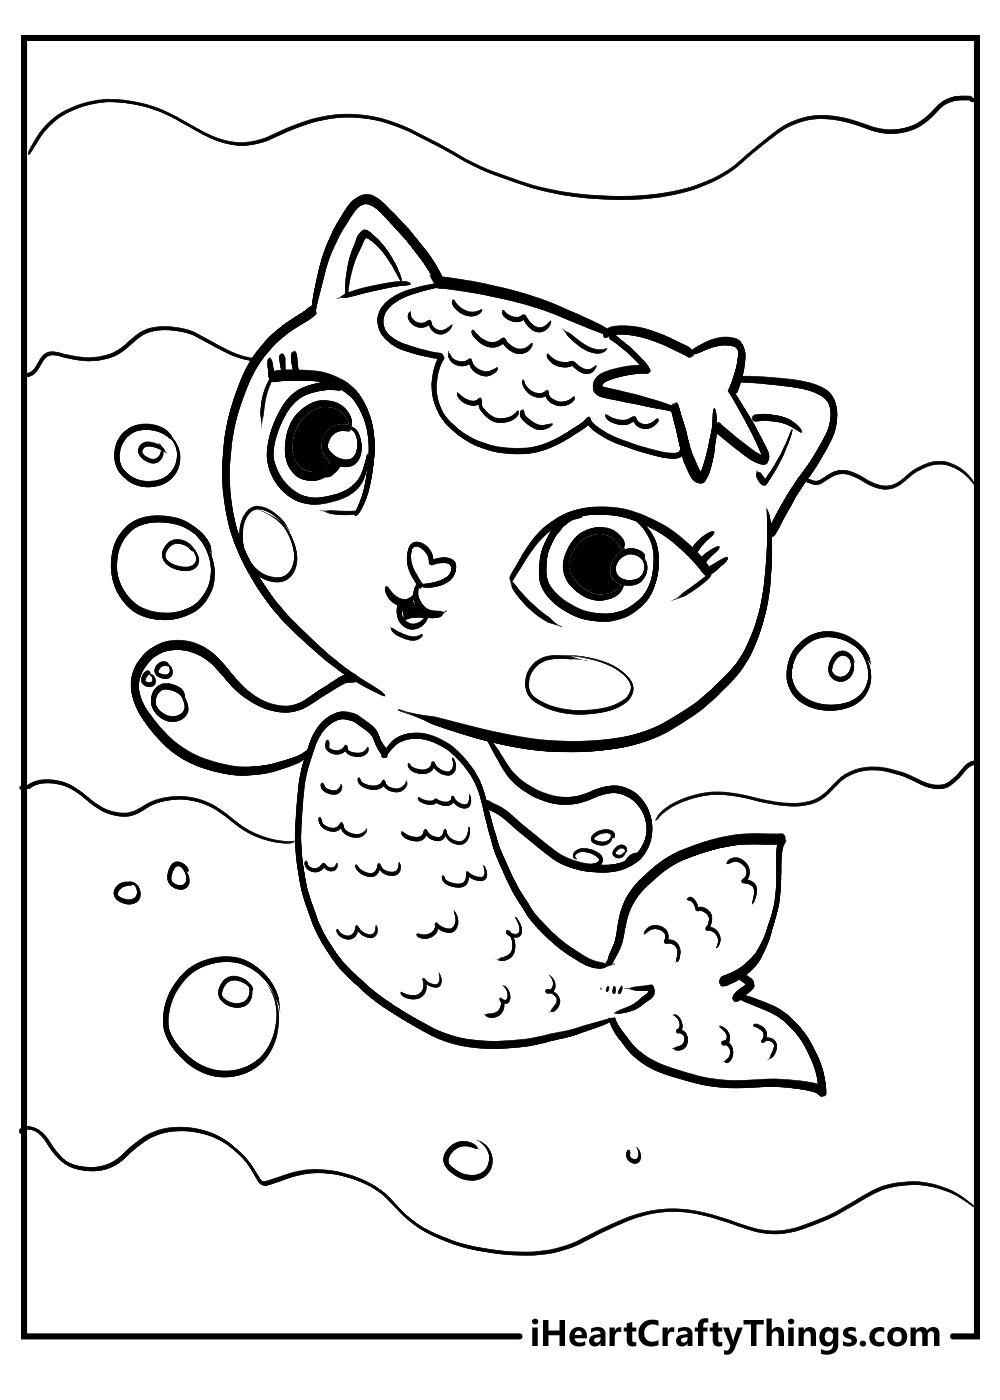 Printable gabbys dollhouse coloring pages updated